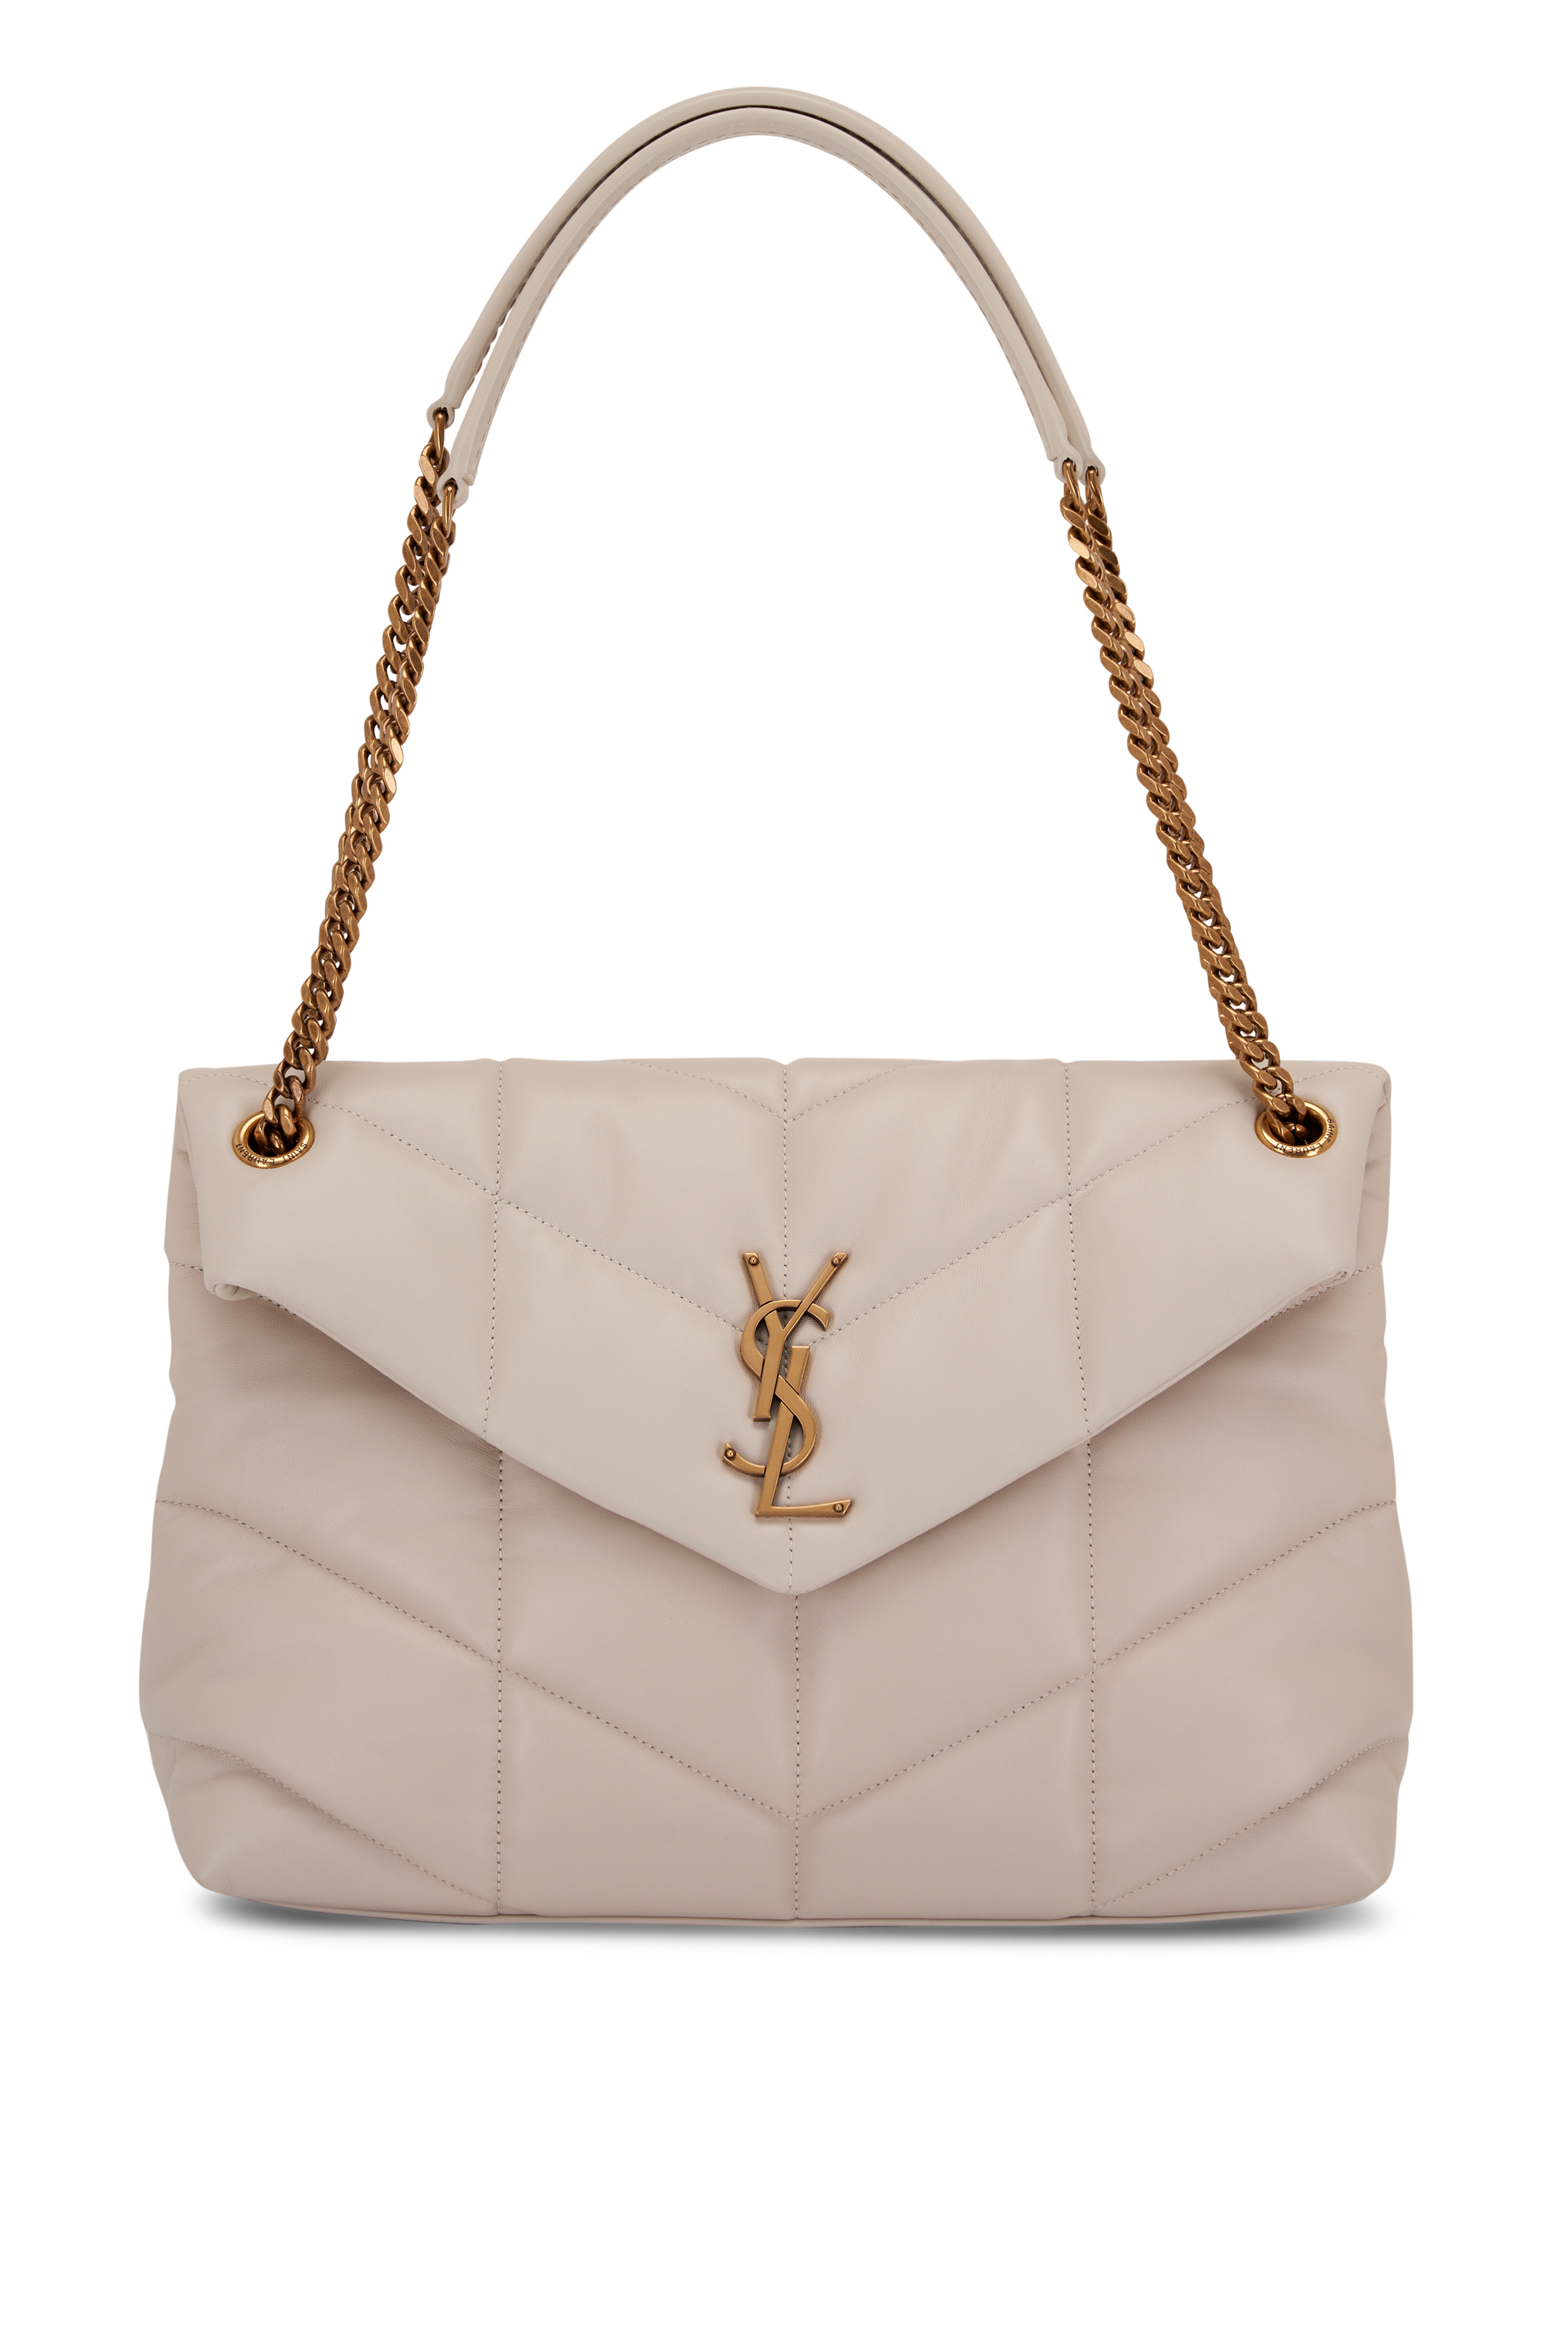 How To Style YSL Toy Loulou in 2023  City outfits, Taupe outfit, Beige bag  outfit